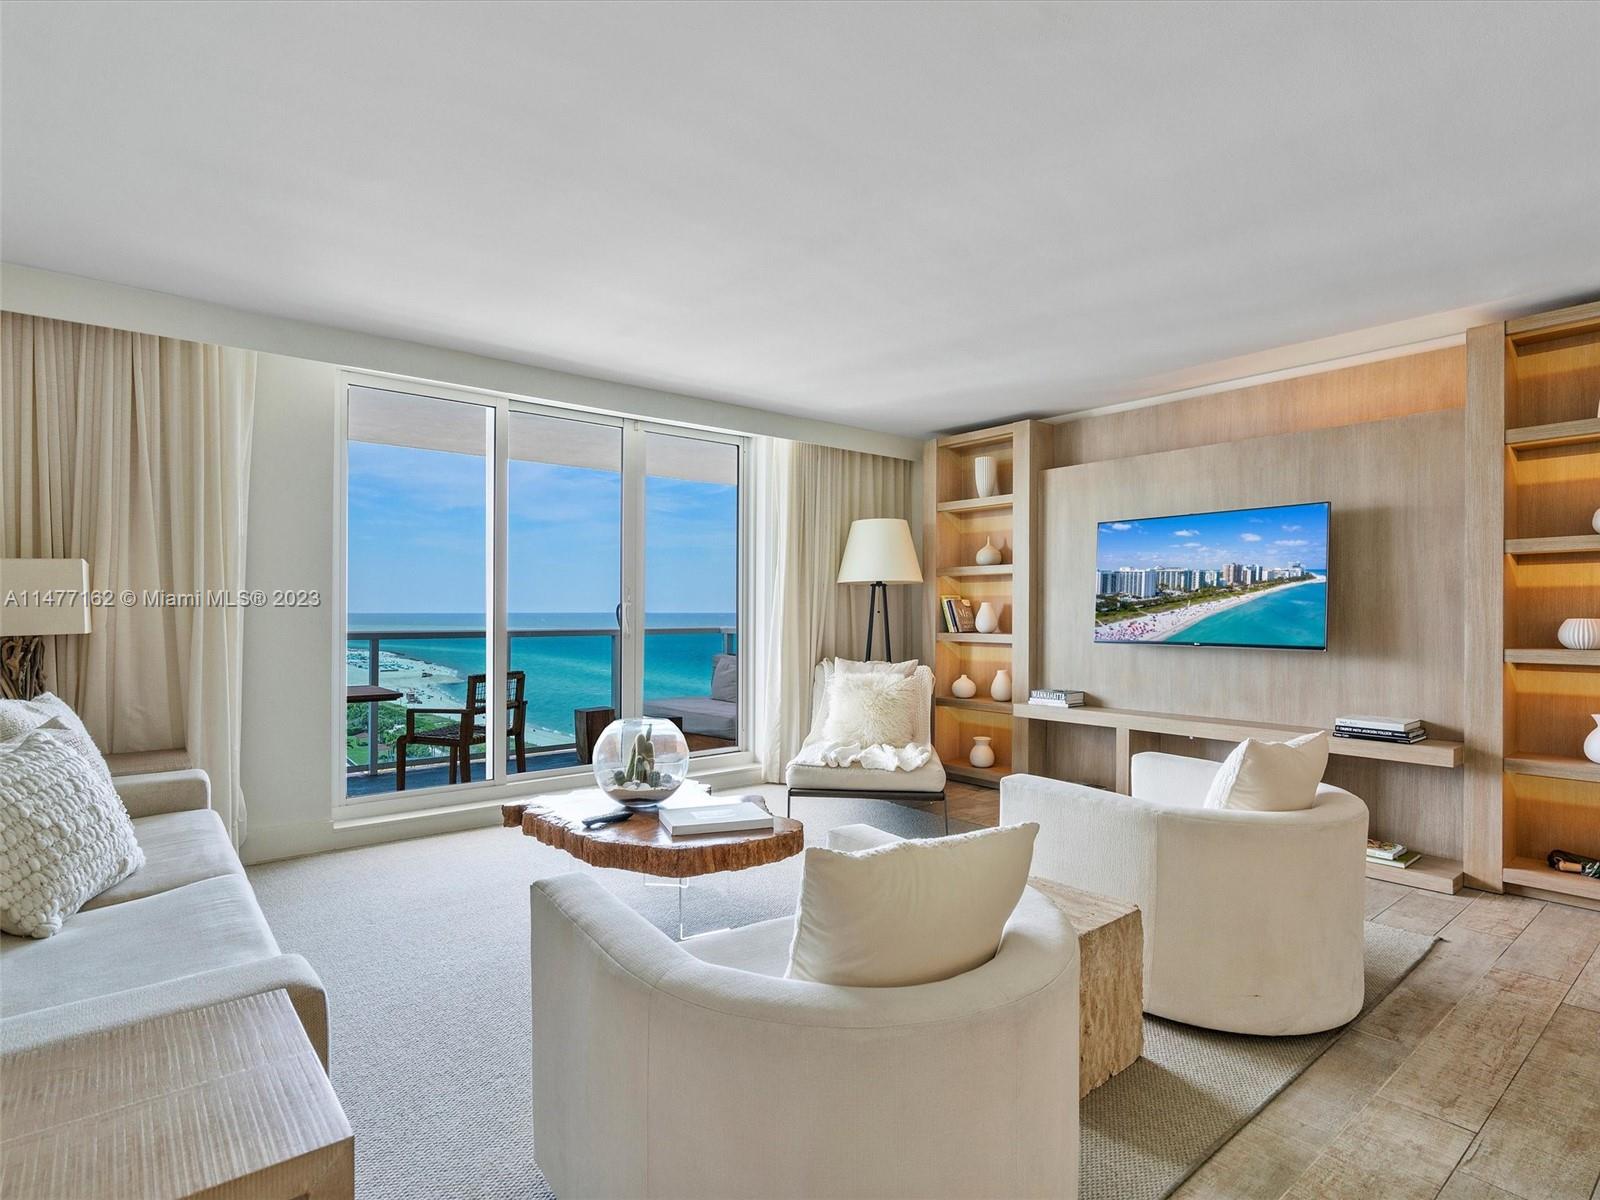 Discover the epitome of 5-star living in this luxurious oceanfront condo at 1 Hotel & Homes. Two of the three bedrooms offer breathtaking views right over the sandy shores, delivering a daily beachfront escape. Residents here enjoy exclusive access to a 14,000 sq. ft. gym, a serene spa, and chauffeured electric cars for ultimate convenience. Don't miss this rare opportunity to reside in one of Miami Beach's most prestigious addresses. Experience resort-style living with a private rooftop pool and bar, four exceptional restaurants, four bars, and more. Partnering with Five Star Luxury Travel, this property generates remarkable rental income, adding to its allure. Owning this condo means more than just experiencing luxury; it also means enjoying a steady income stream.